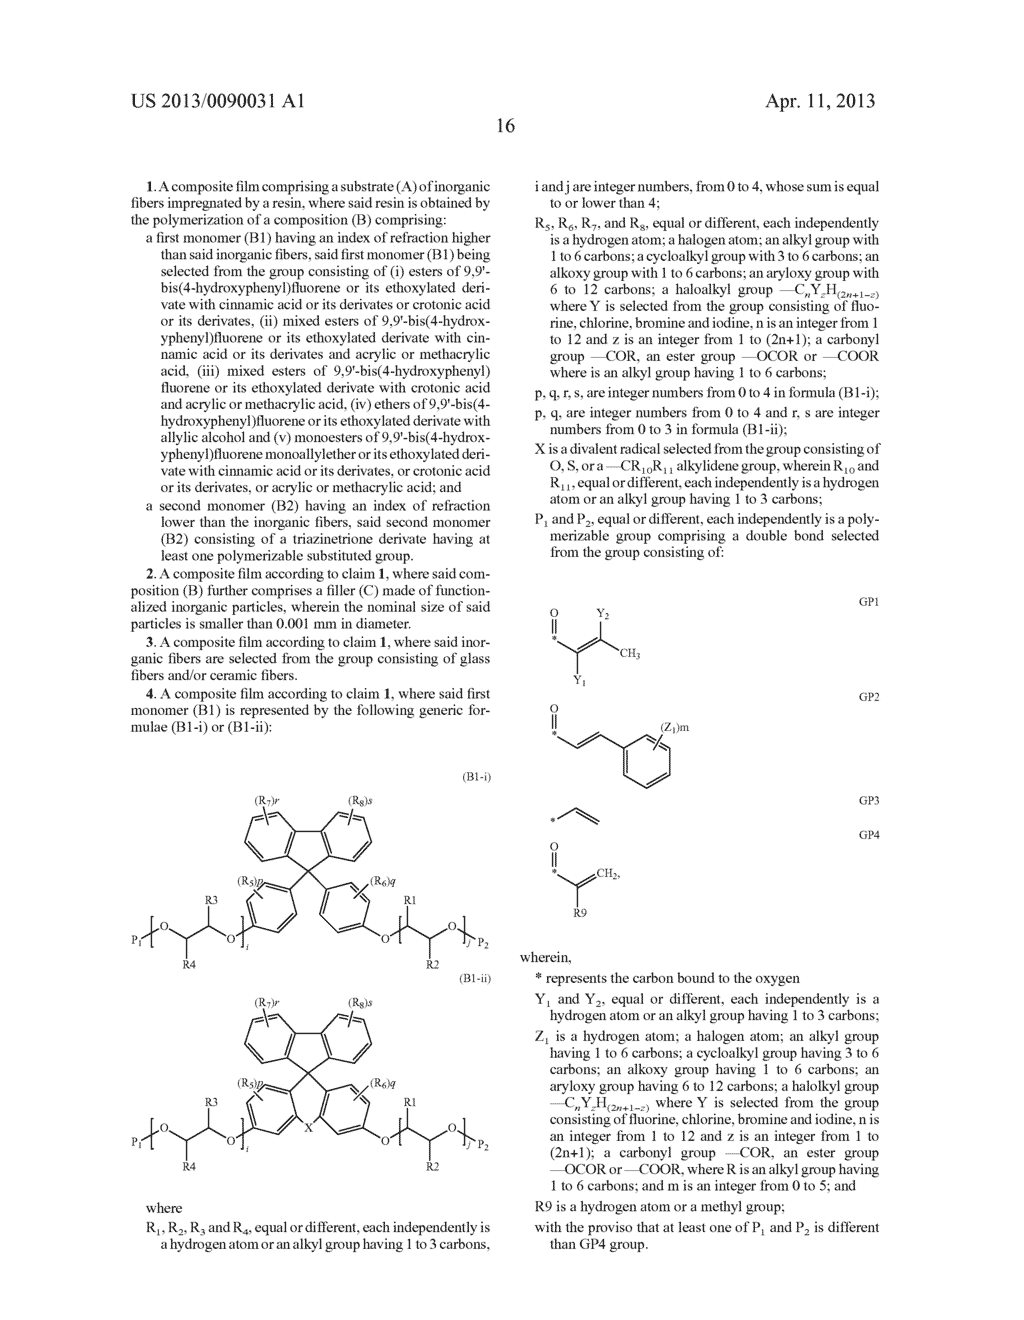 COMPOSITE FILM MATERIAL COMPRISING A RESIN OF FLUORENE CROTONATE, FLUORENE     CINNAMATE, FLUORENE ACRYLATE, FLUORENE METHACRYLATE, FLUORENE ALLYLETHER     OR A COMBINATION THEREOF - diagram, schematic, and image 20